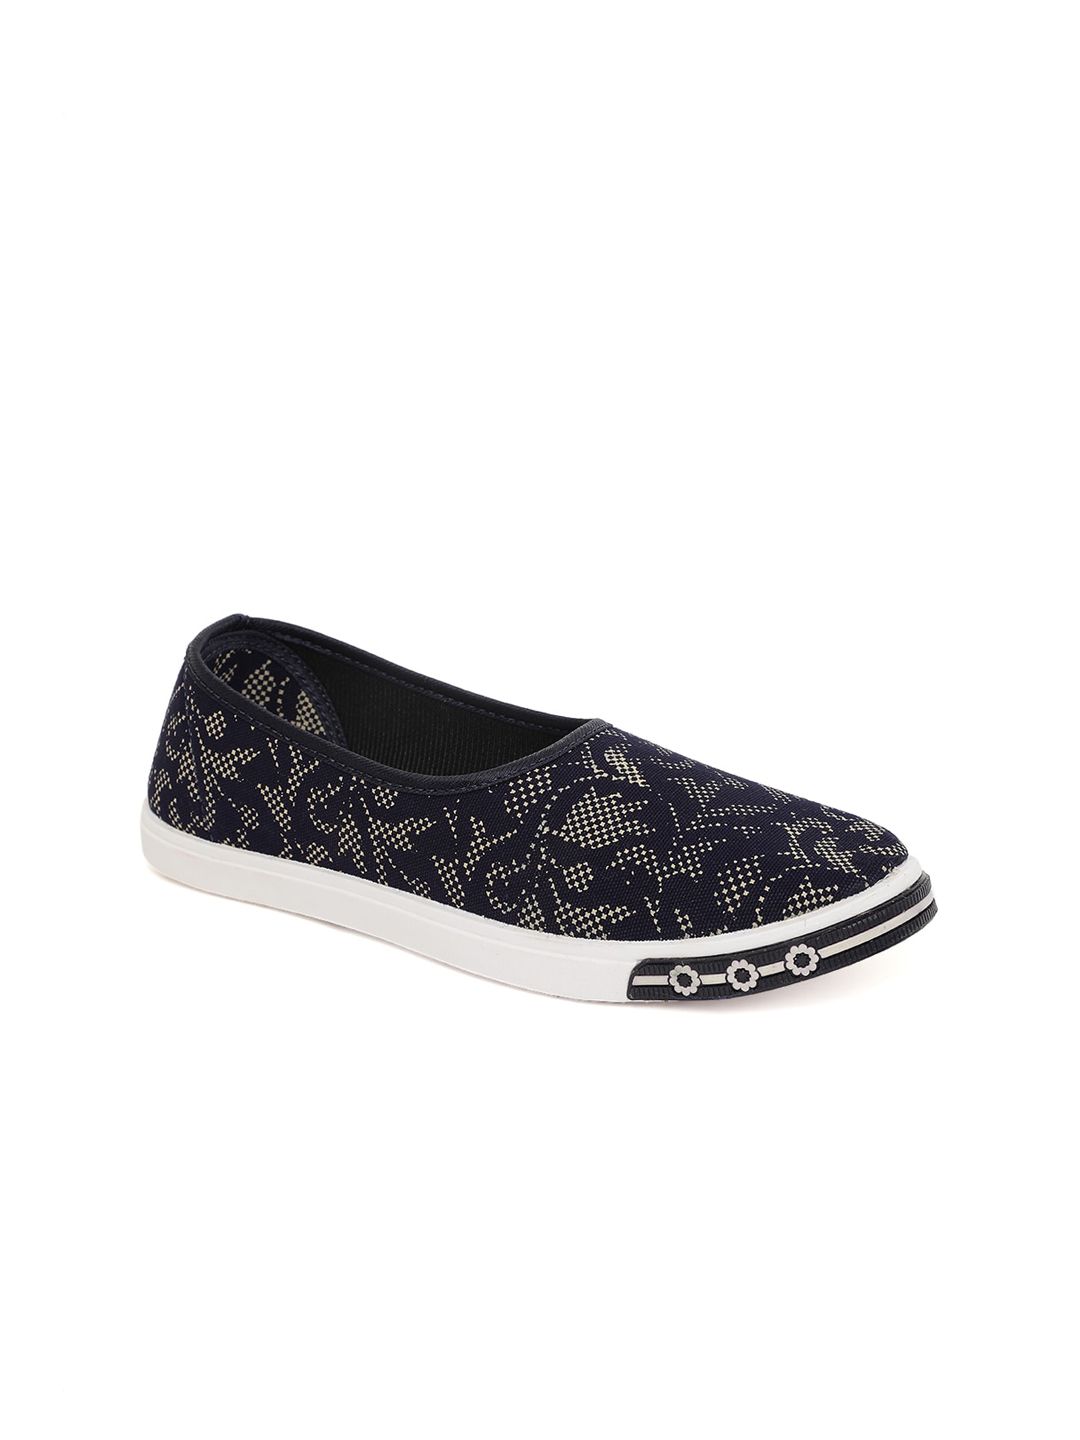 Paragon Women Printed Slip-On Sneakers Price in India